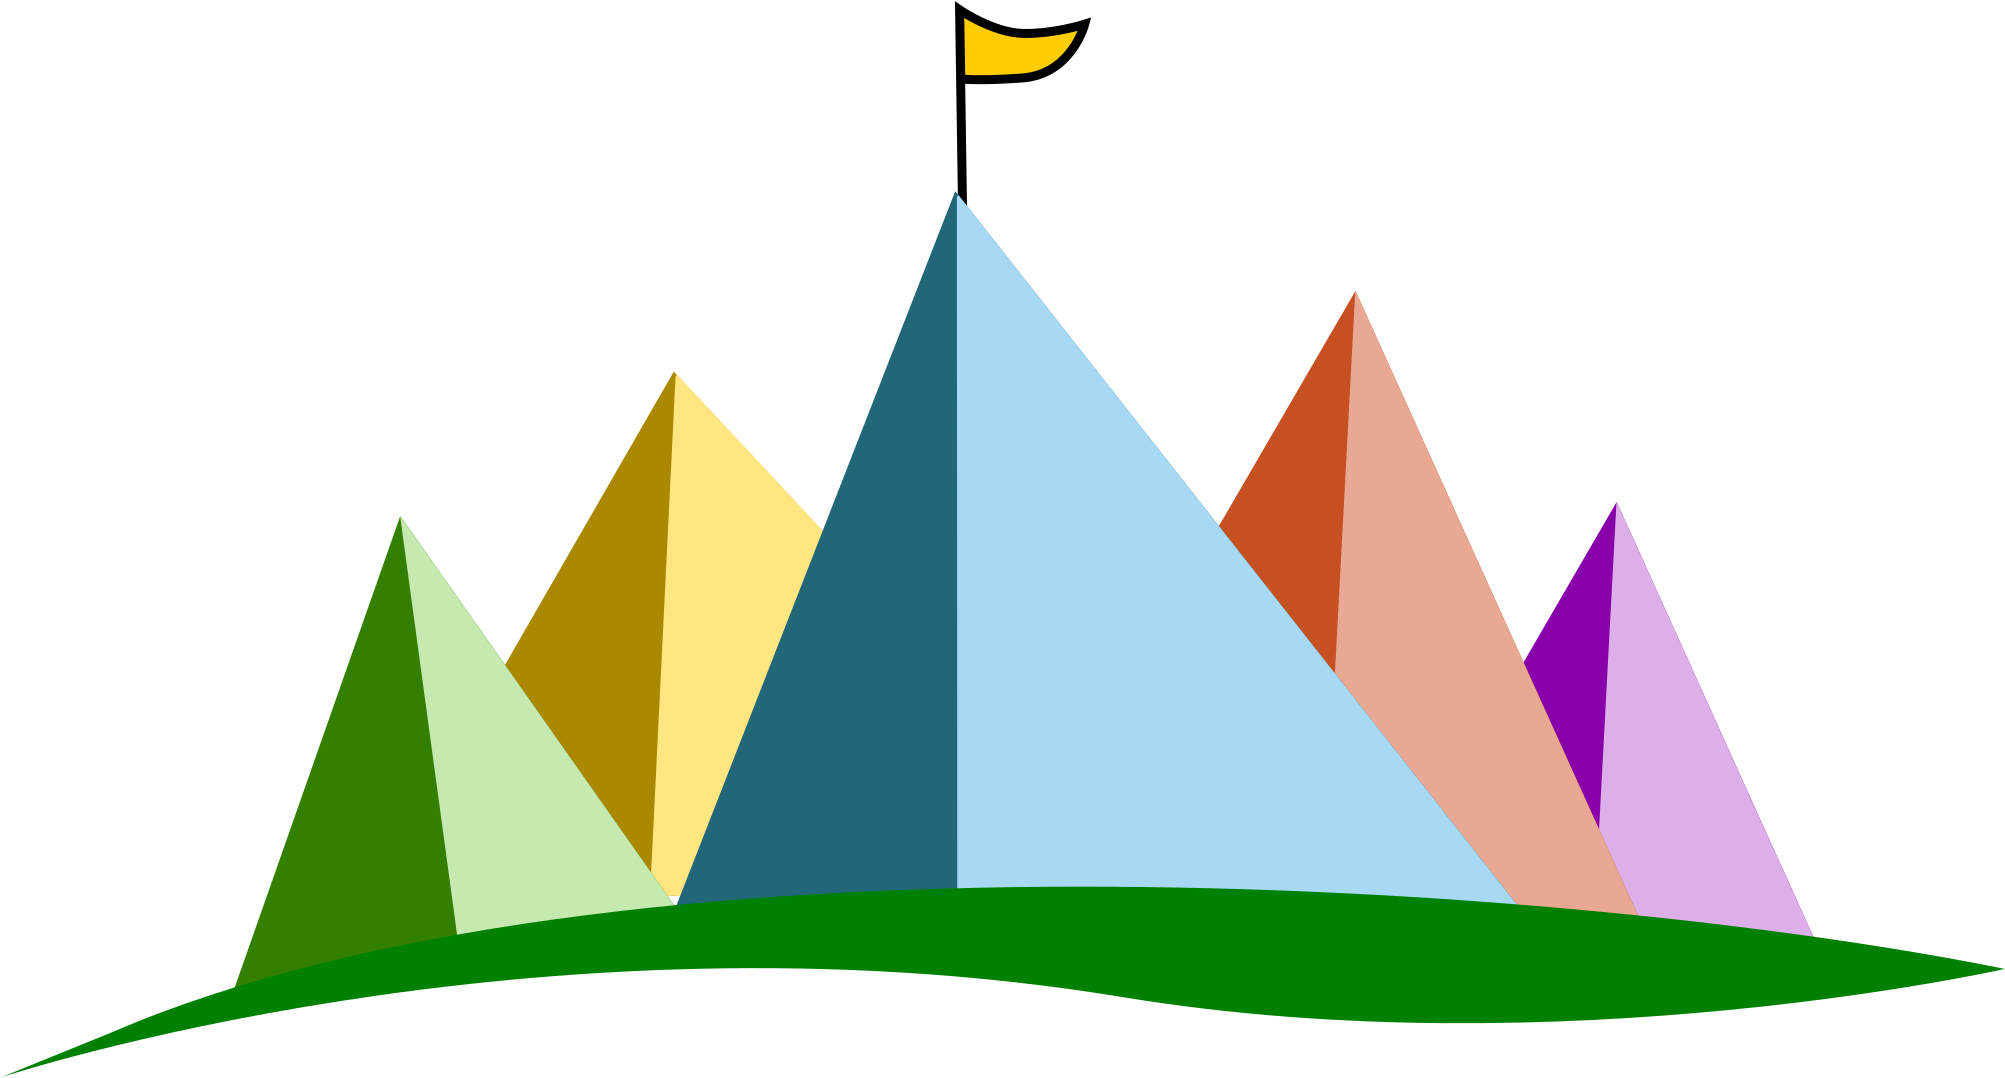 A Group Of Pyramids With A Flag On Top